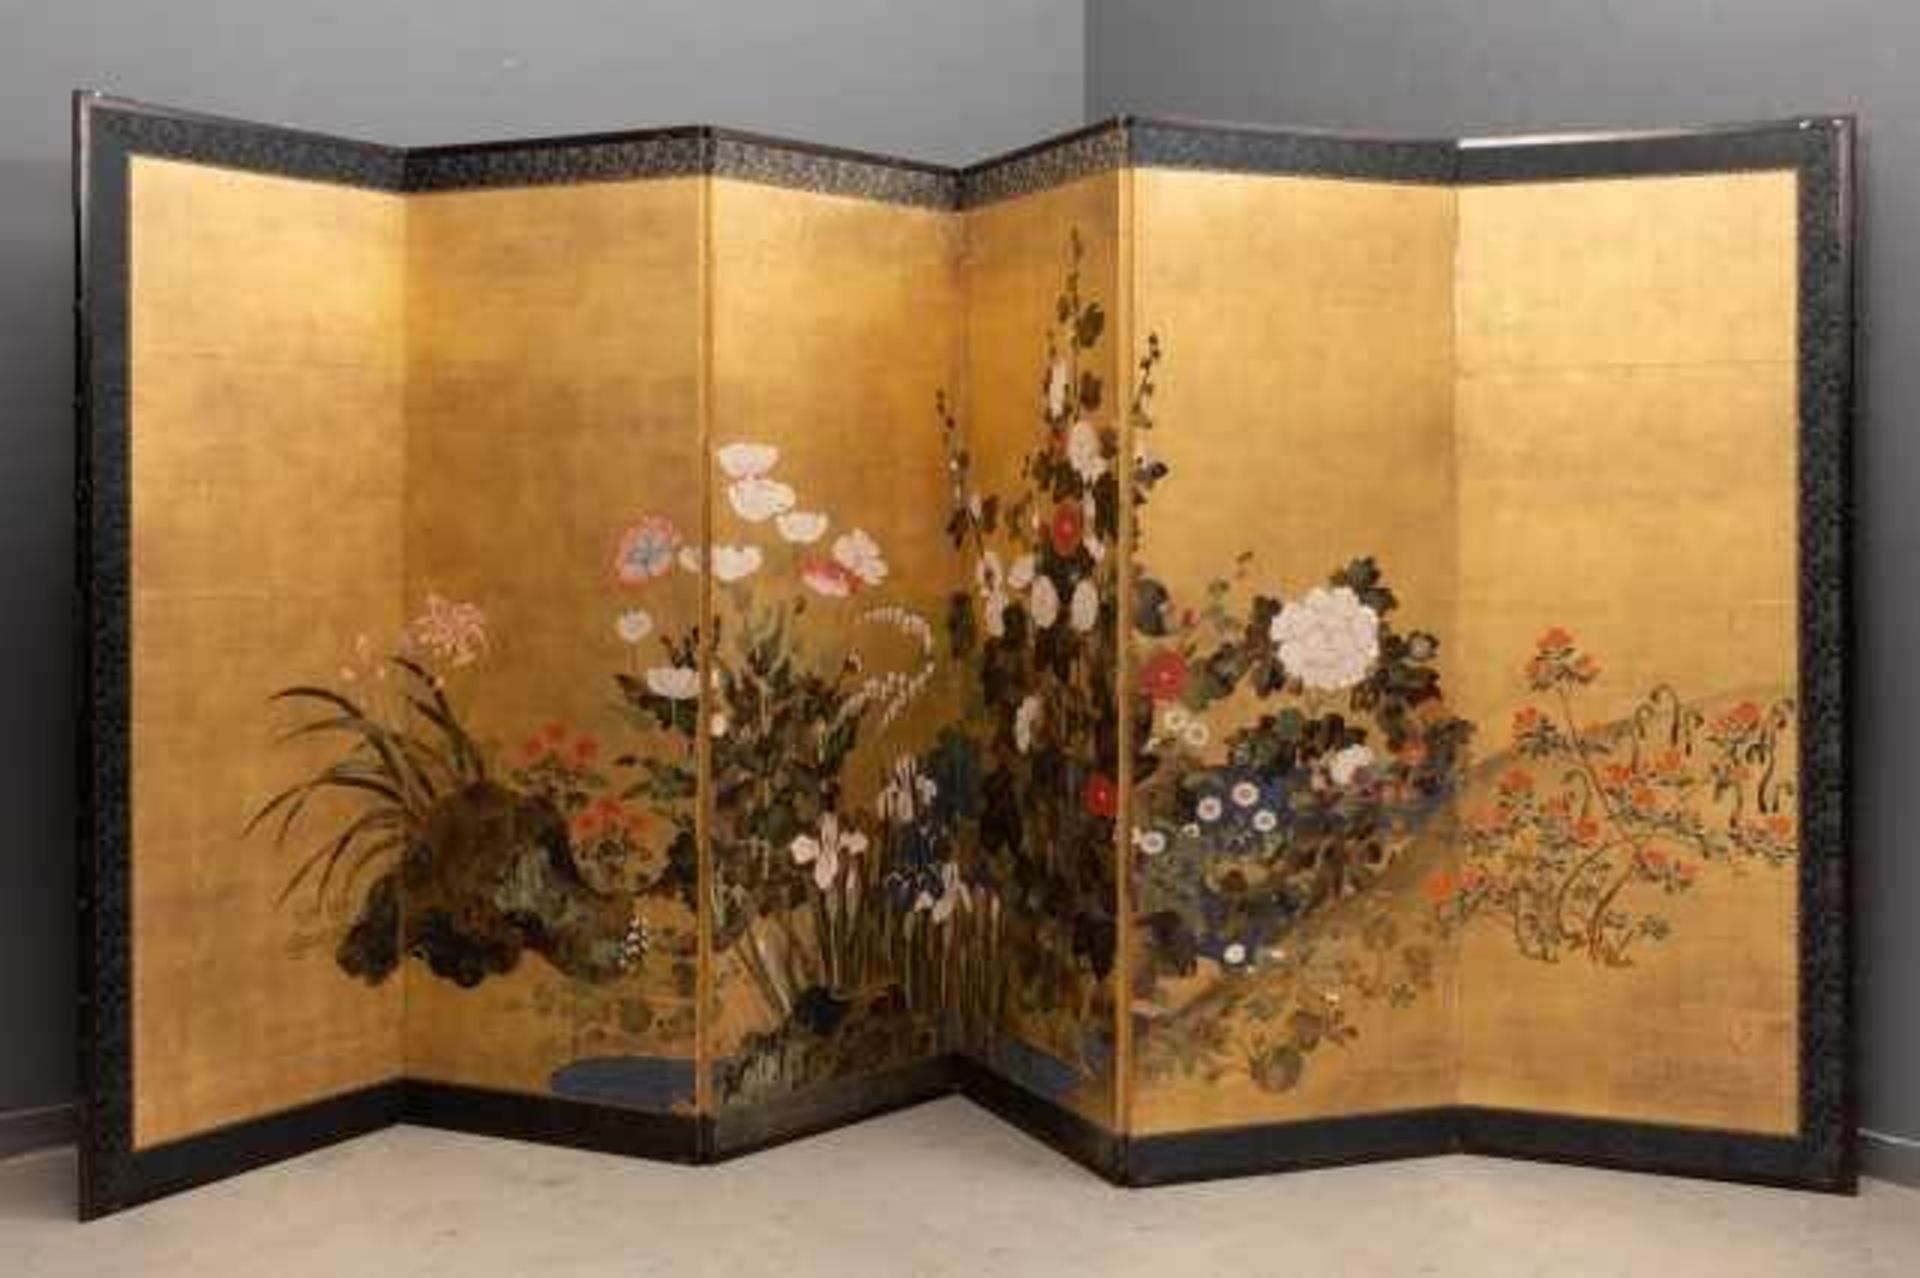 Six-panel handpainted folding screen with an elaborate flower motif, among which chrysanthemums